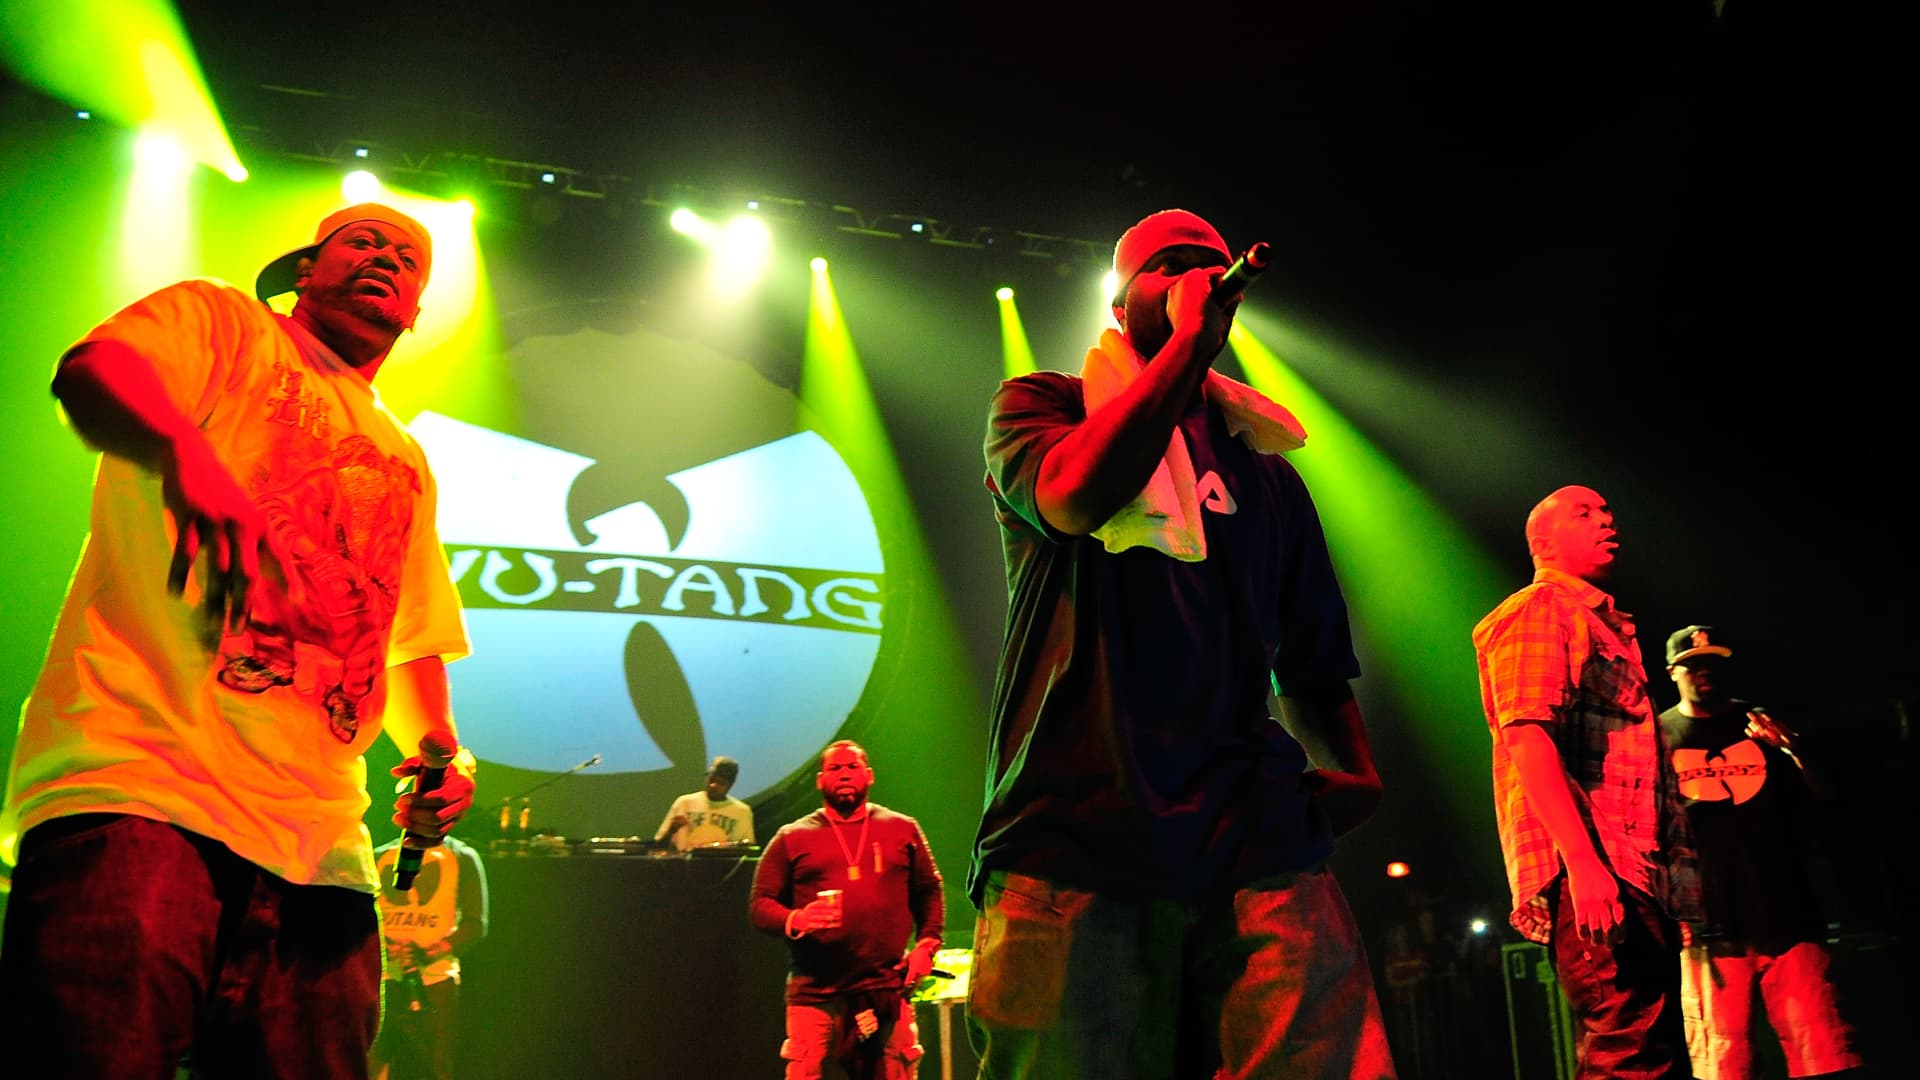 Wu-Tang Clan plan to release only one copy of their next album to the highest bidder.